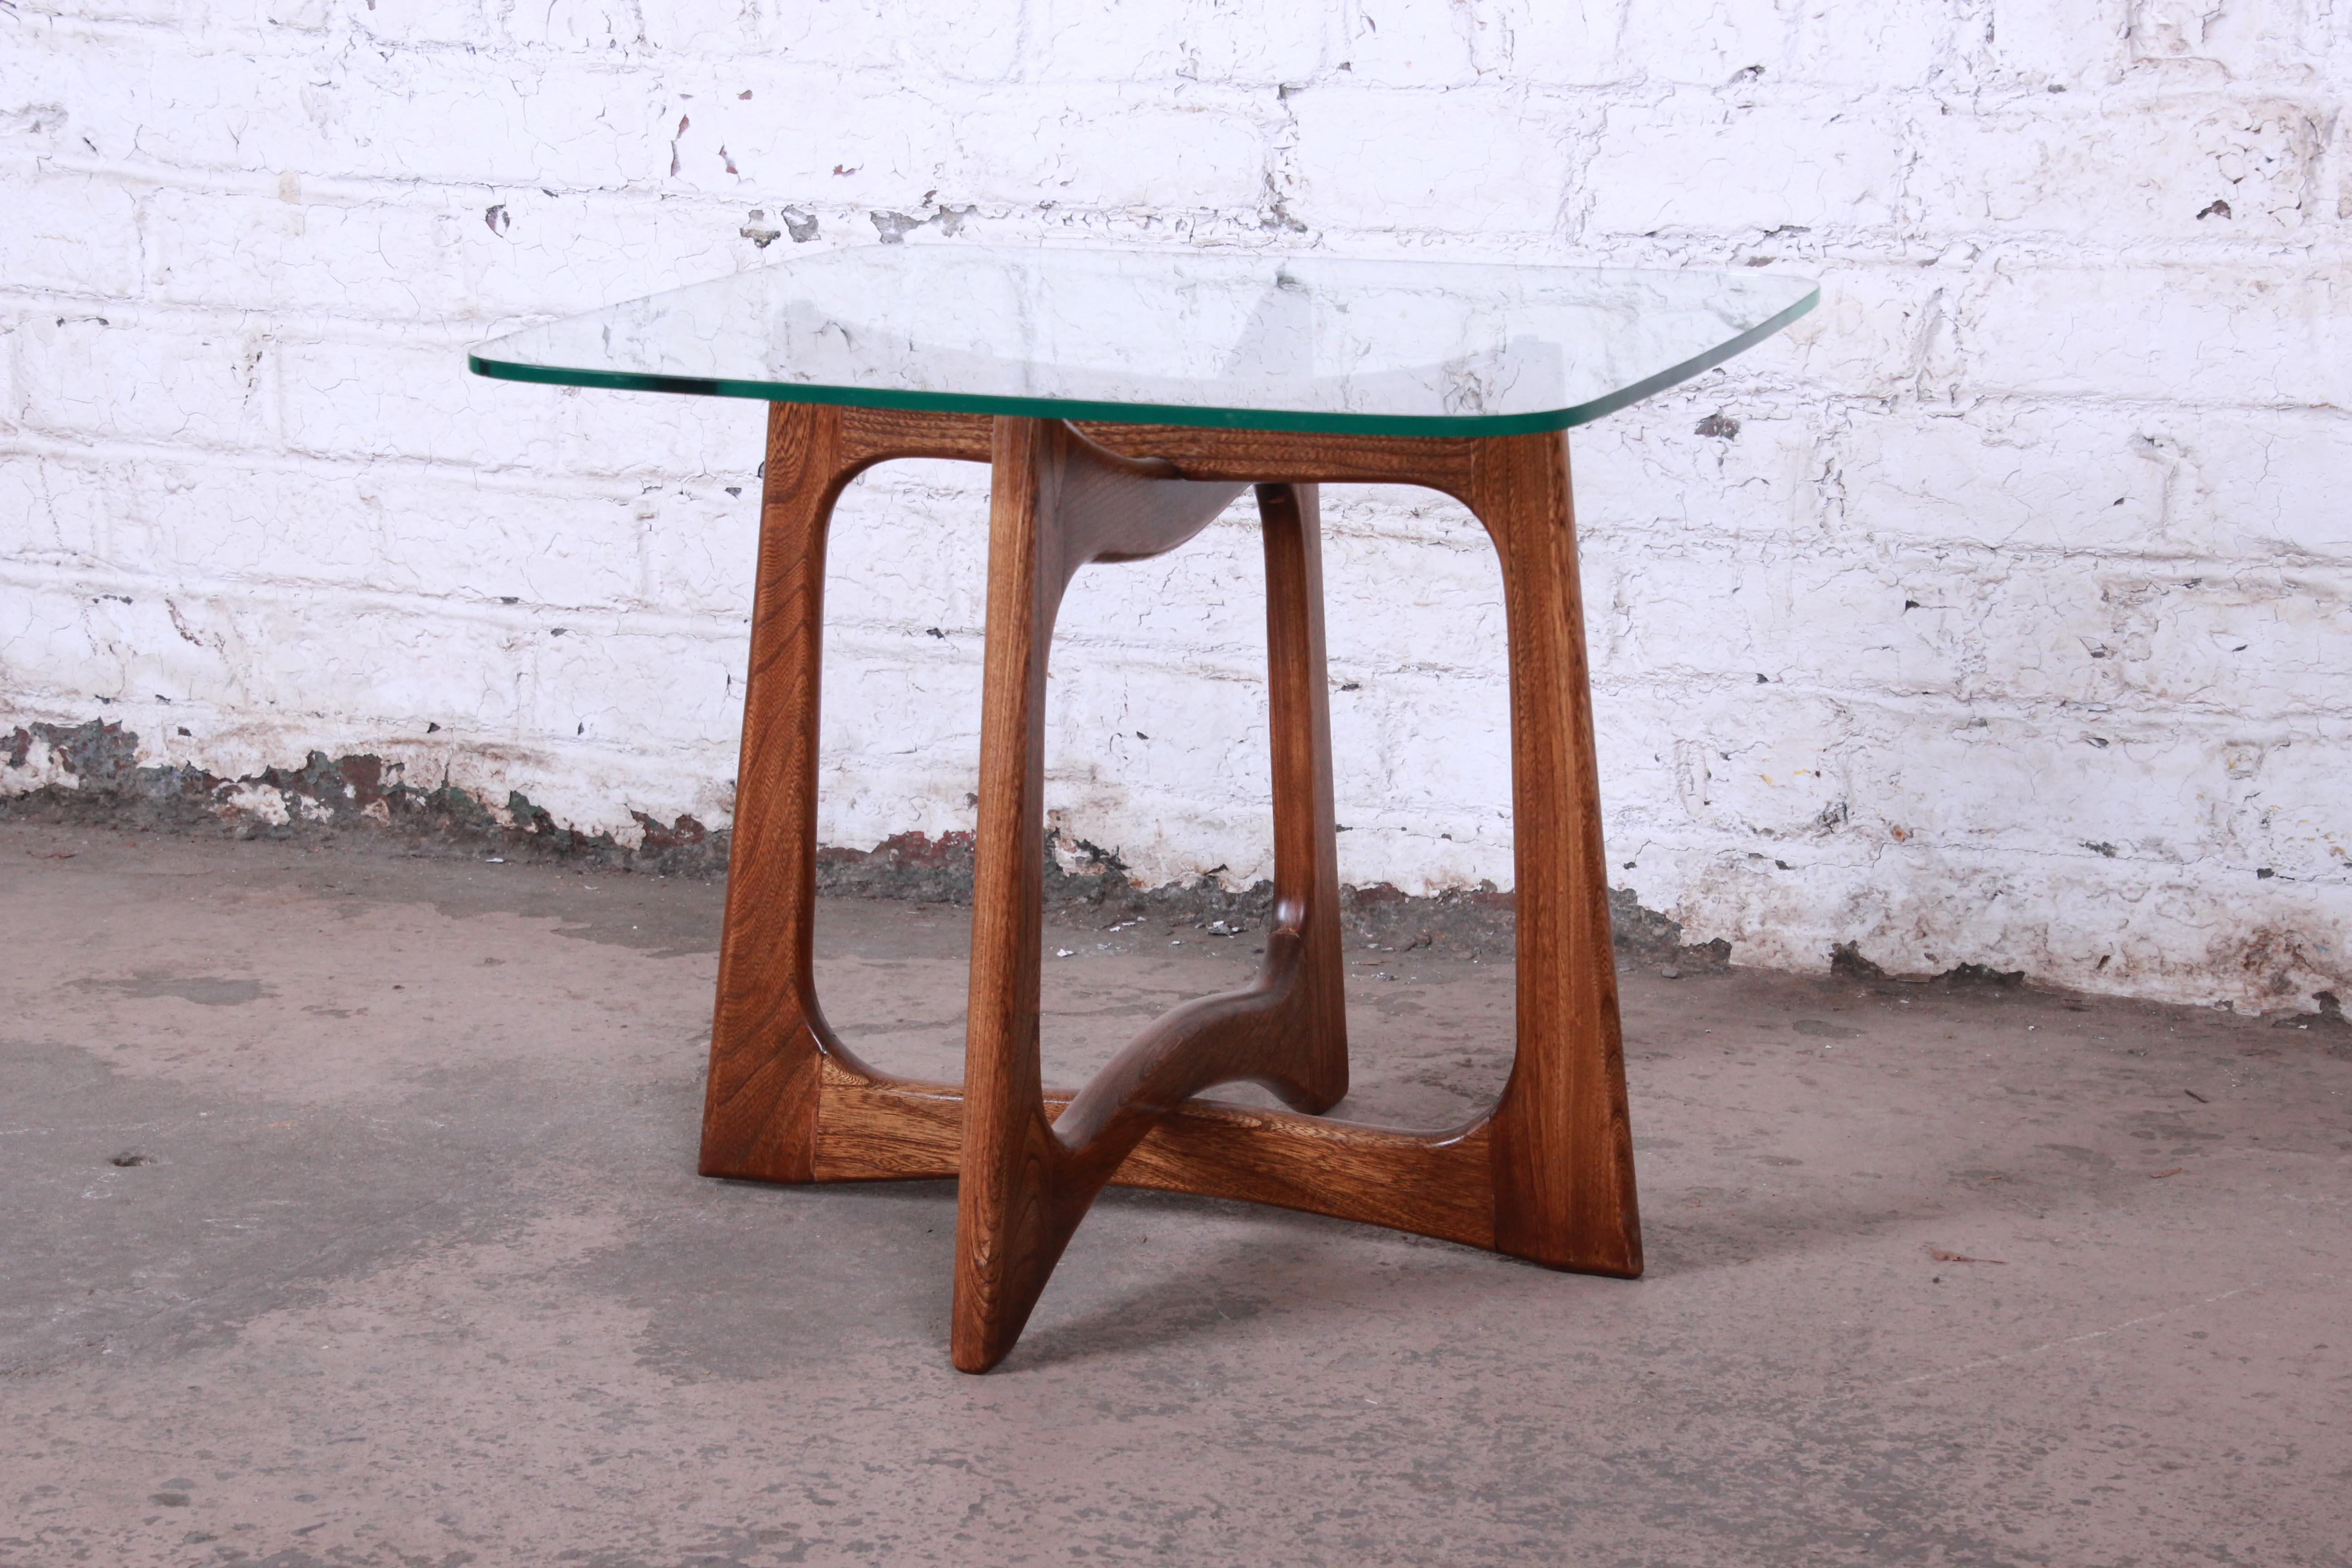 A gorgeous Mid-Century Modern sculpted walnut coffee table designed by Adrian Pearsall for Craft Associates. The table features a nice solid sculpted walnut base with beautiful wood grain. An excellent example of Pearsall's iconic design work. The